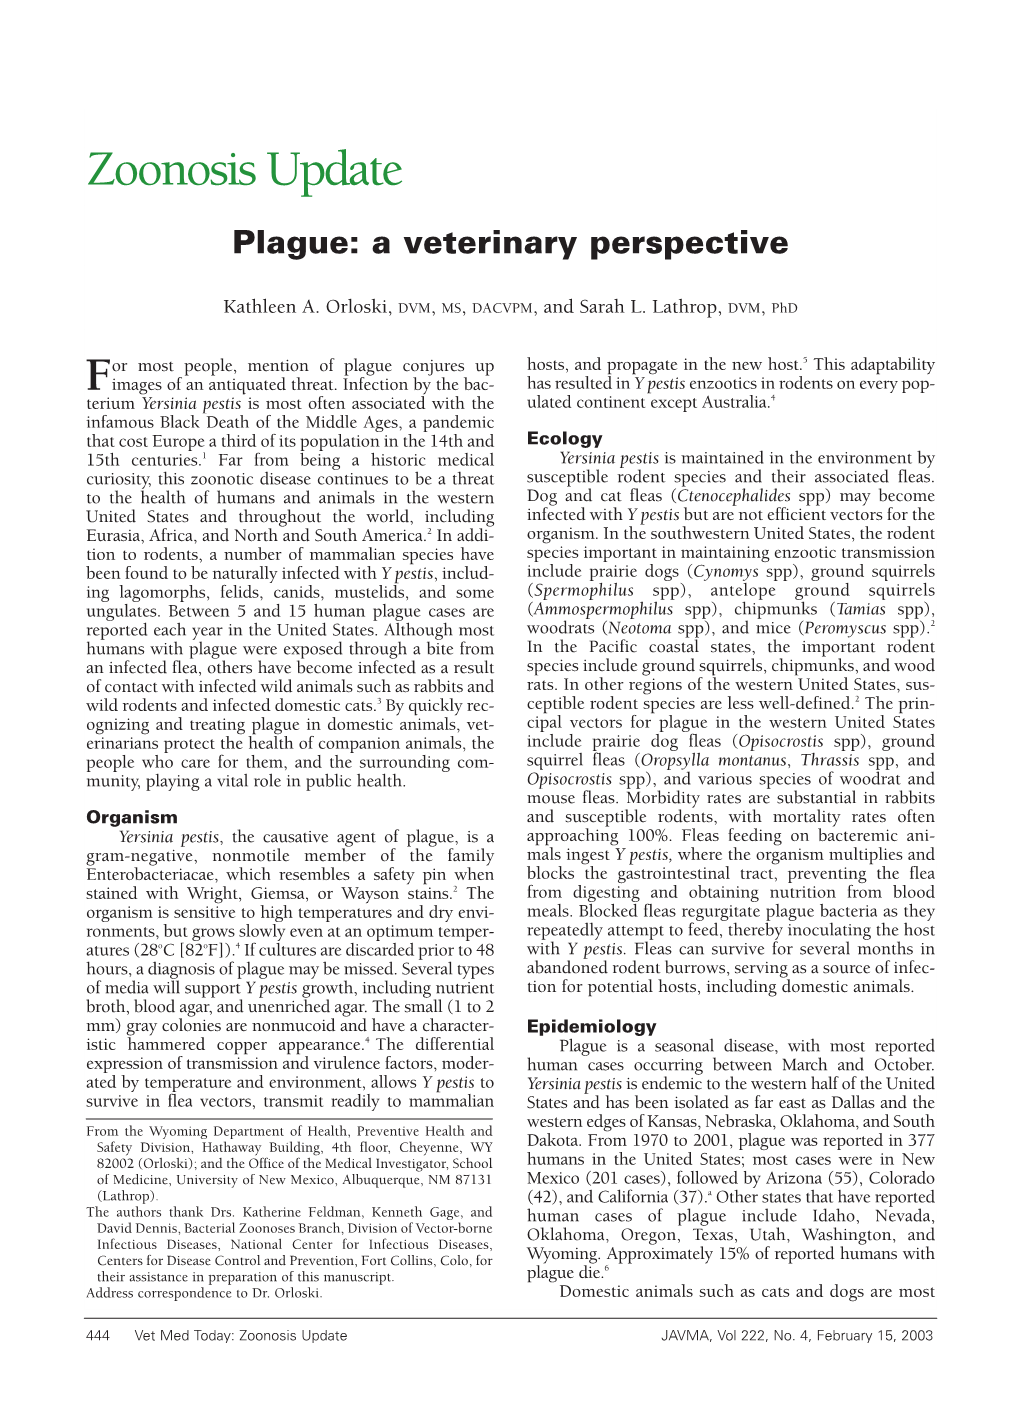 Zoonosis Update Plague: a Veterinary Perspective